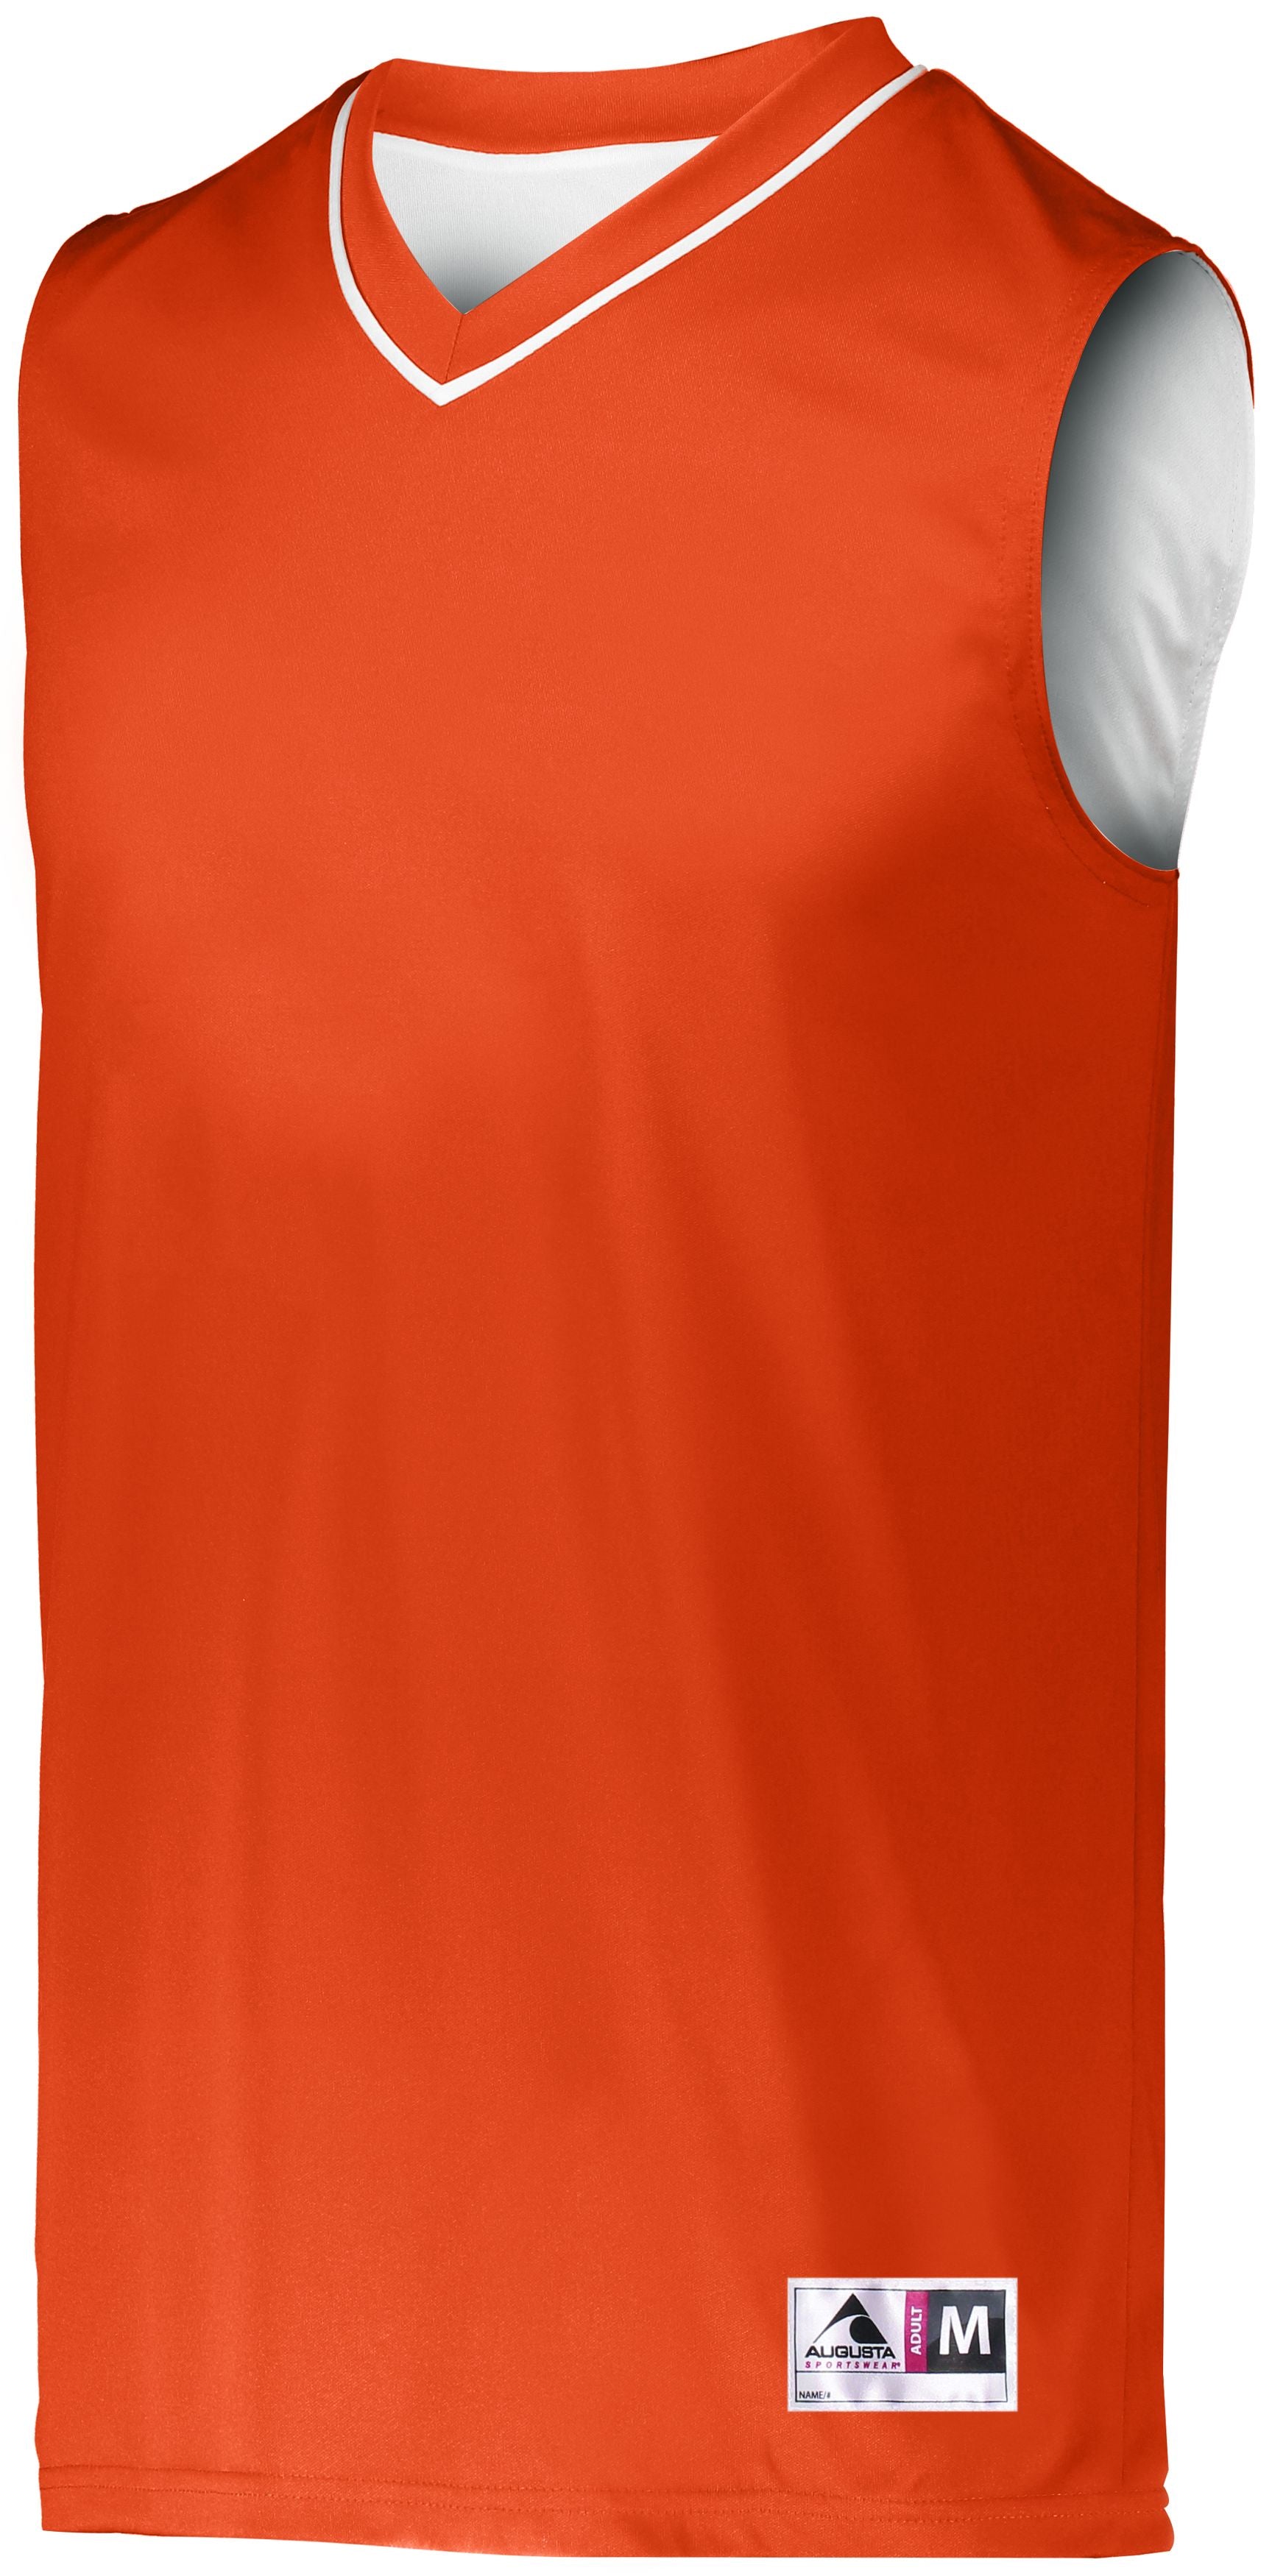 Augusta Sportswear Youth Reversible Two-Color Jersey in Orange/White  -Part of the Youth, Youth-Jersey, Augusta-Products, Basketball, Shirts, All-Sports, All-Sports-1 product lines at KanaleyCreations.com